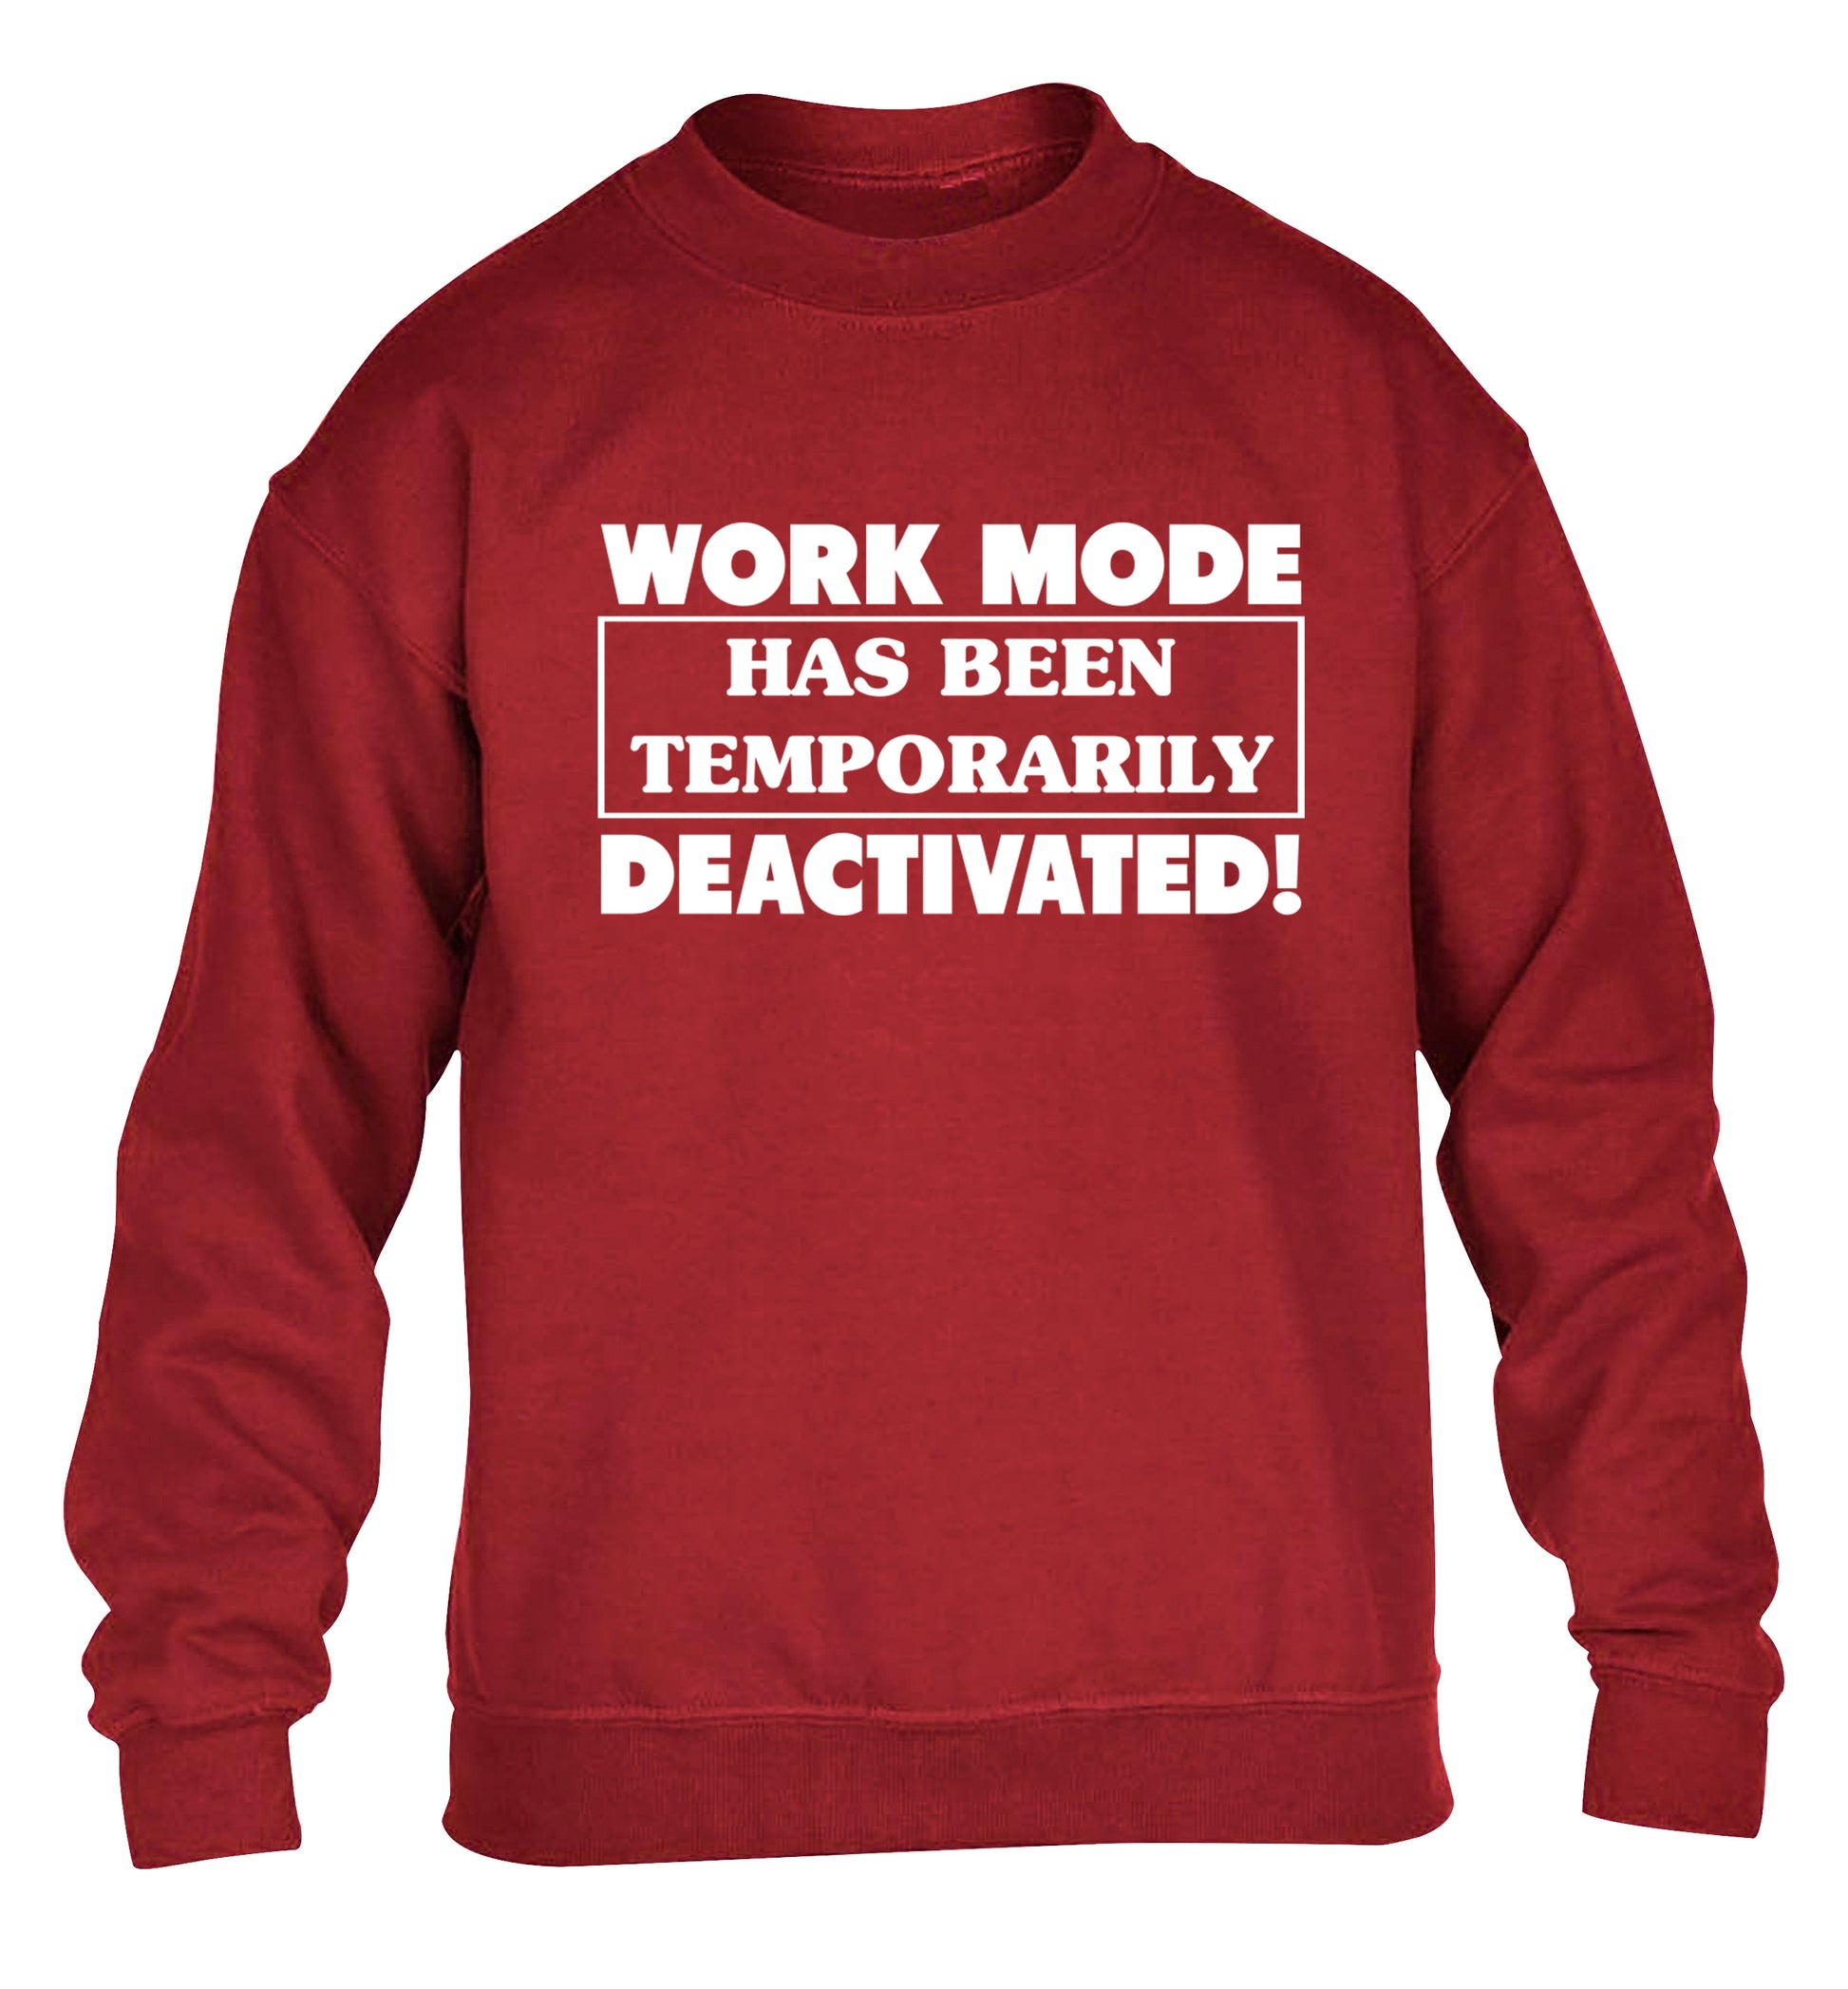 Work mode has now been temporarily deactivated children's grey sweater 12-13 Years